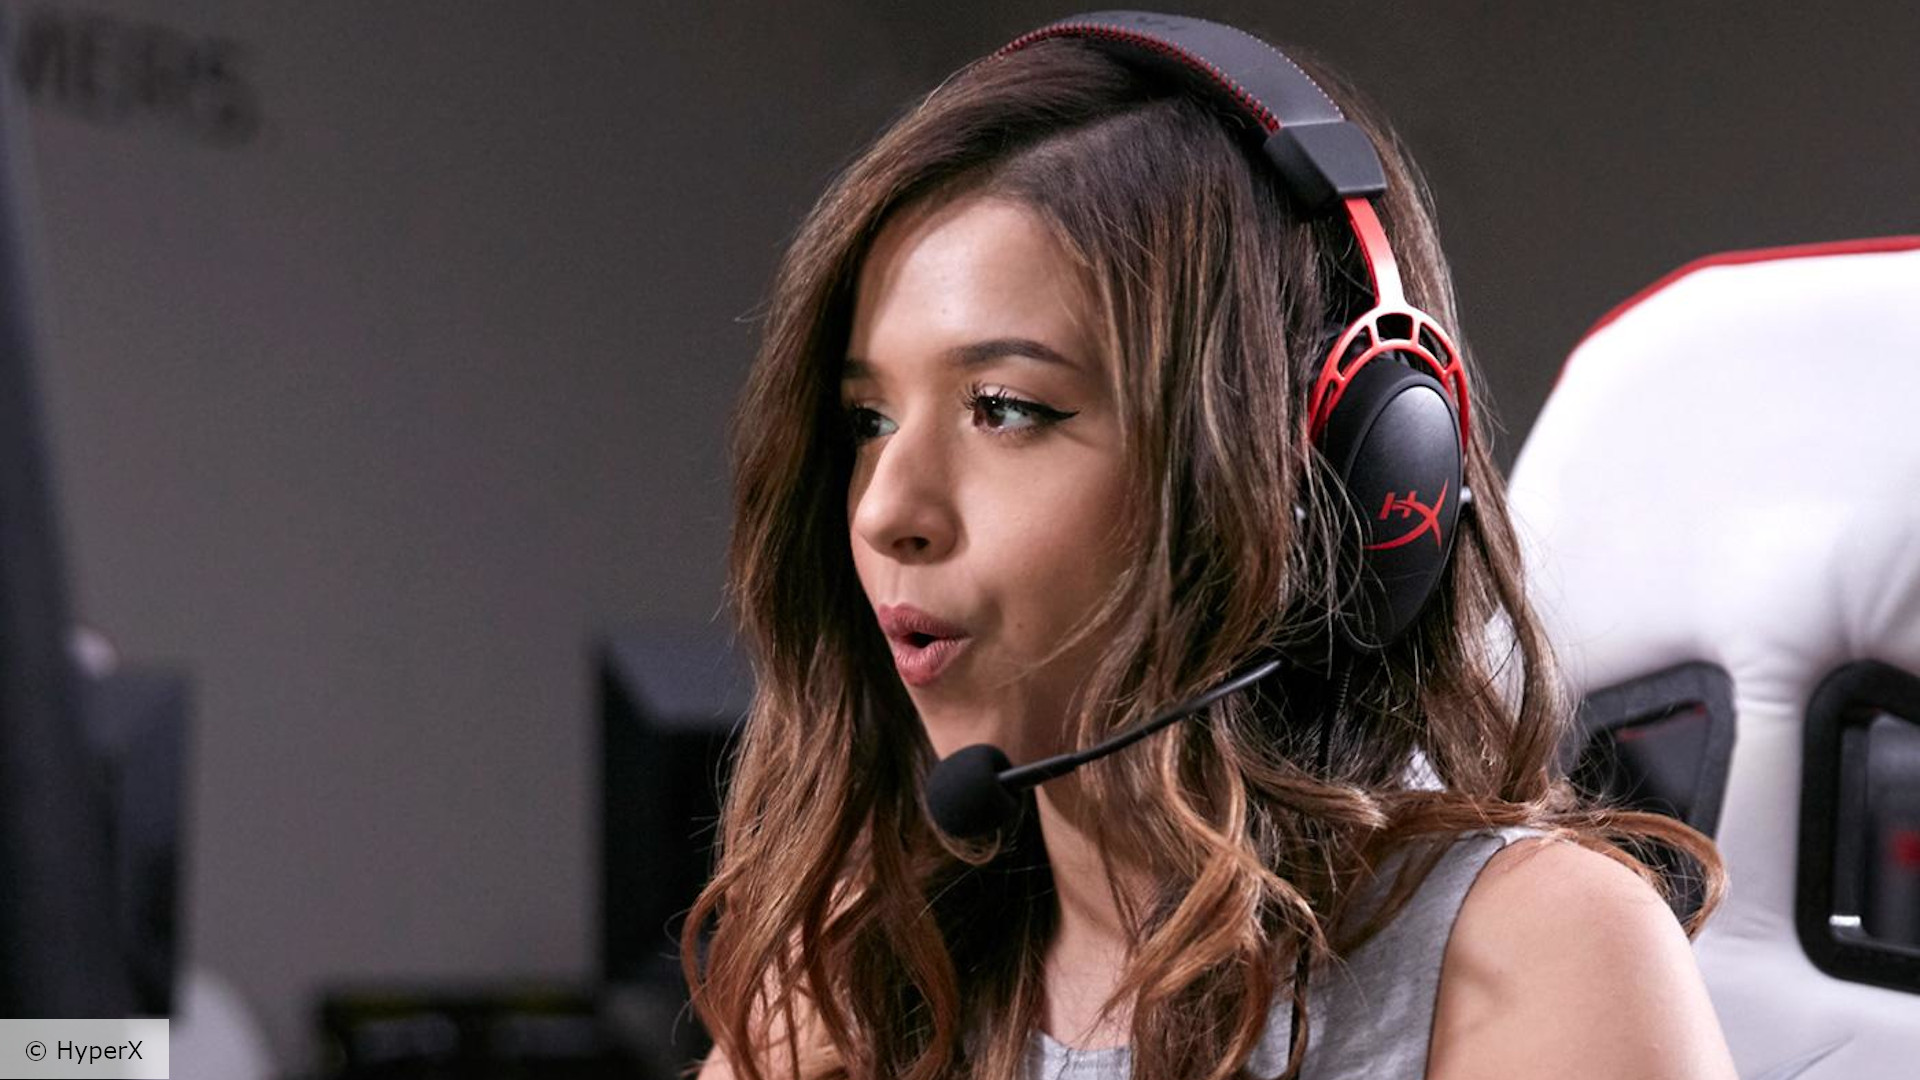 Who is Pokimane? Net worth, earnings, streaming setup, and more